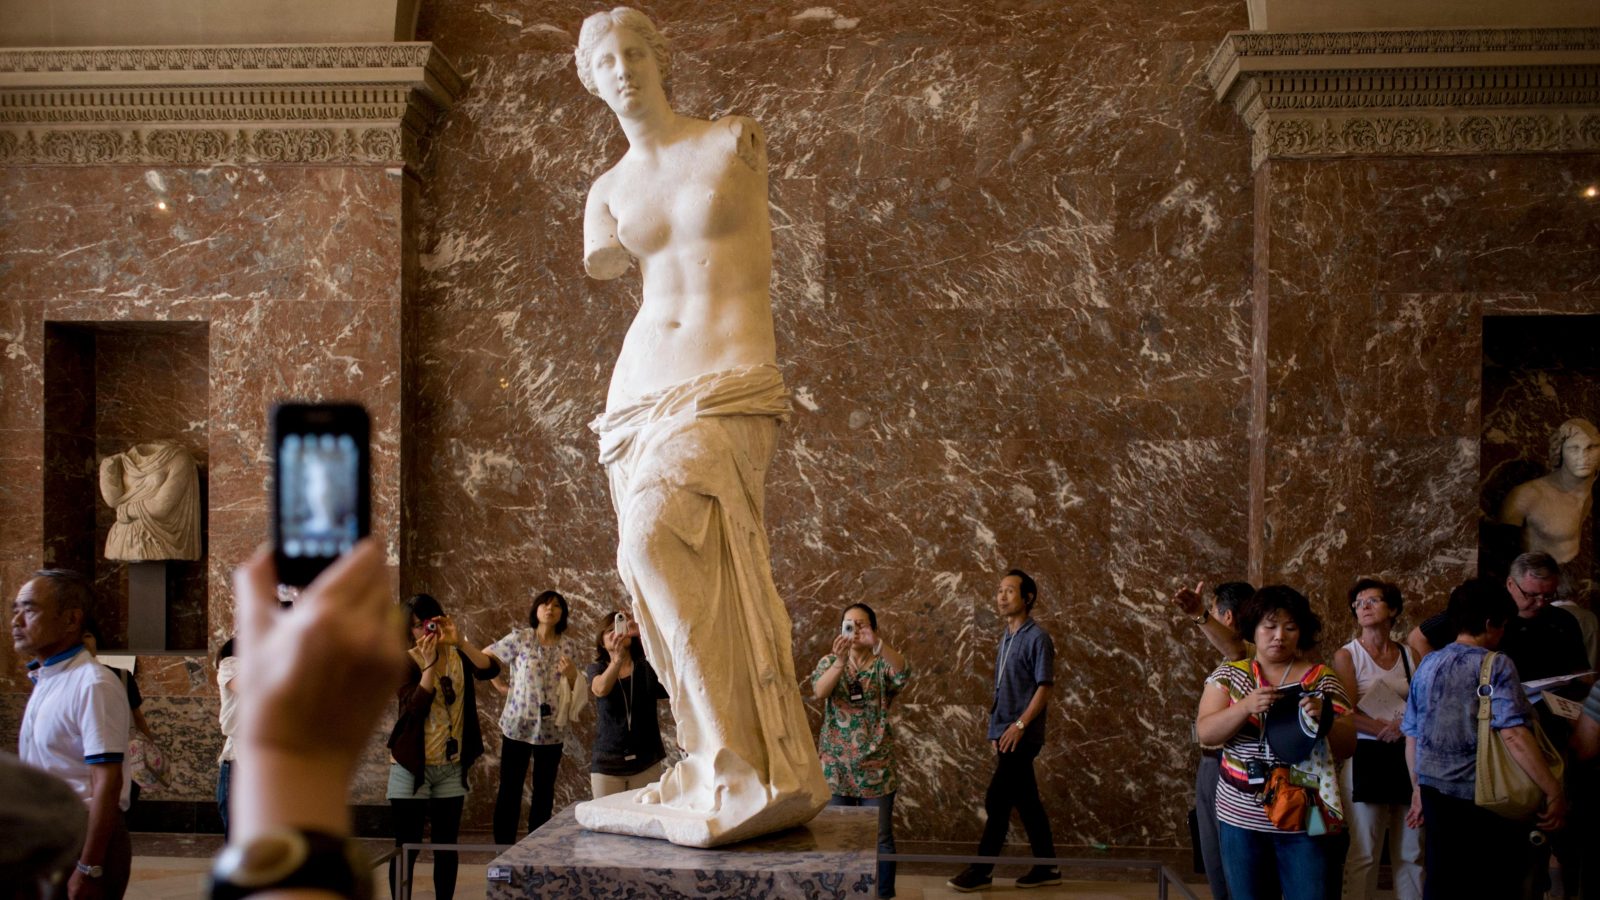 90% Of People Will Fail This General Knowledge Quiz. Will You? Venus de Milo